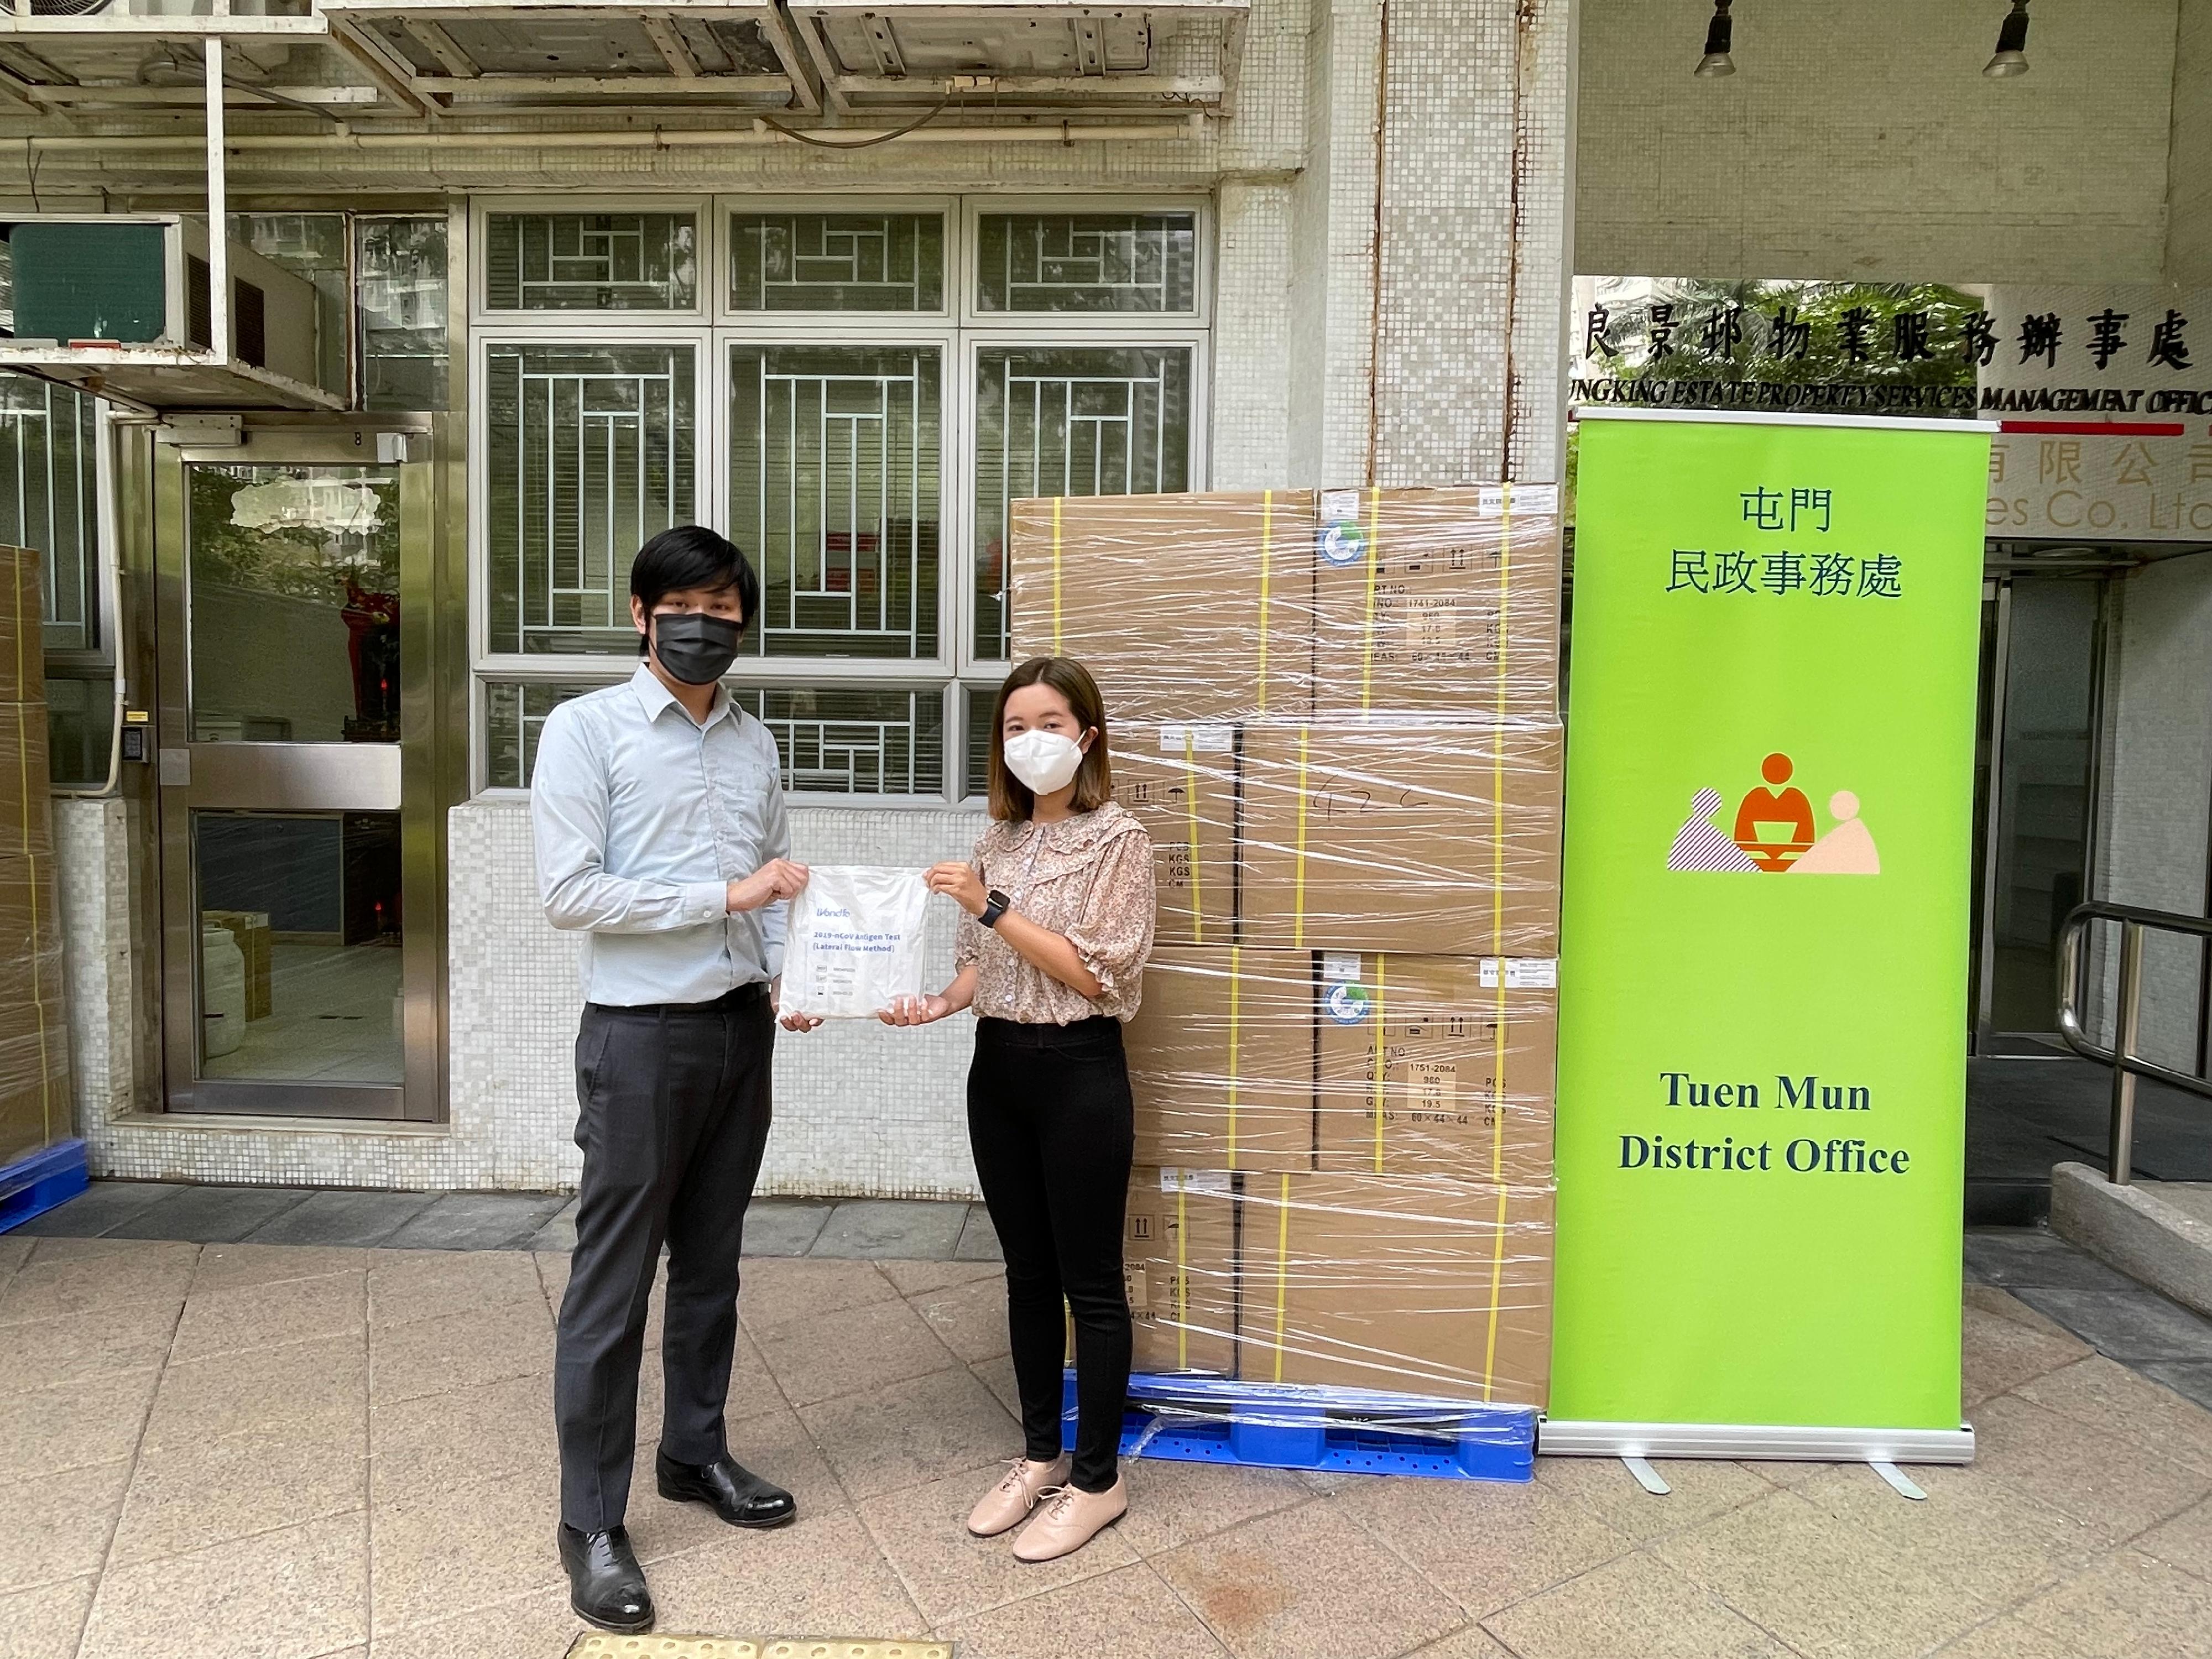 The Tuen Mun District Office today (April 22) distributed COVID-19 rapid test kits to households, cleansing workers and property management staff living and working in Leung King Estate for voluntary testing through the property management company.